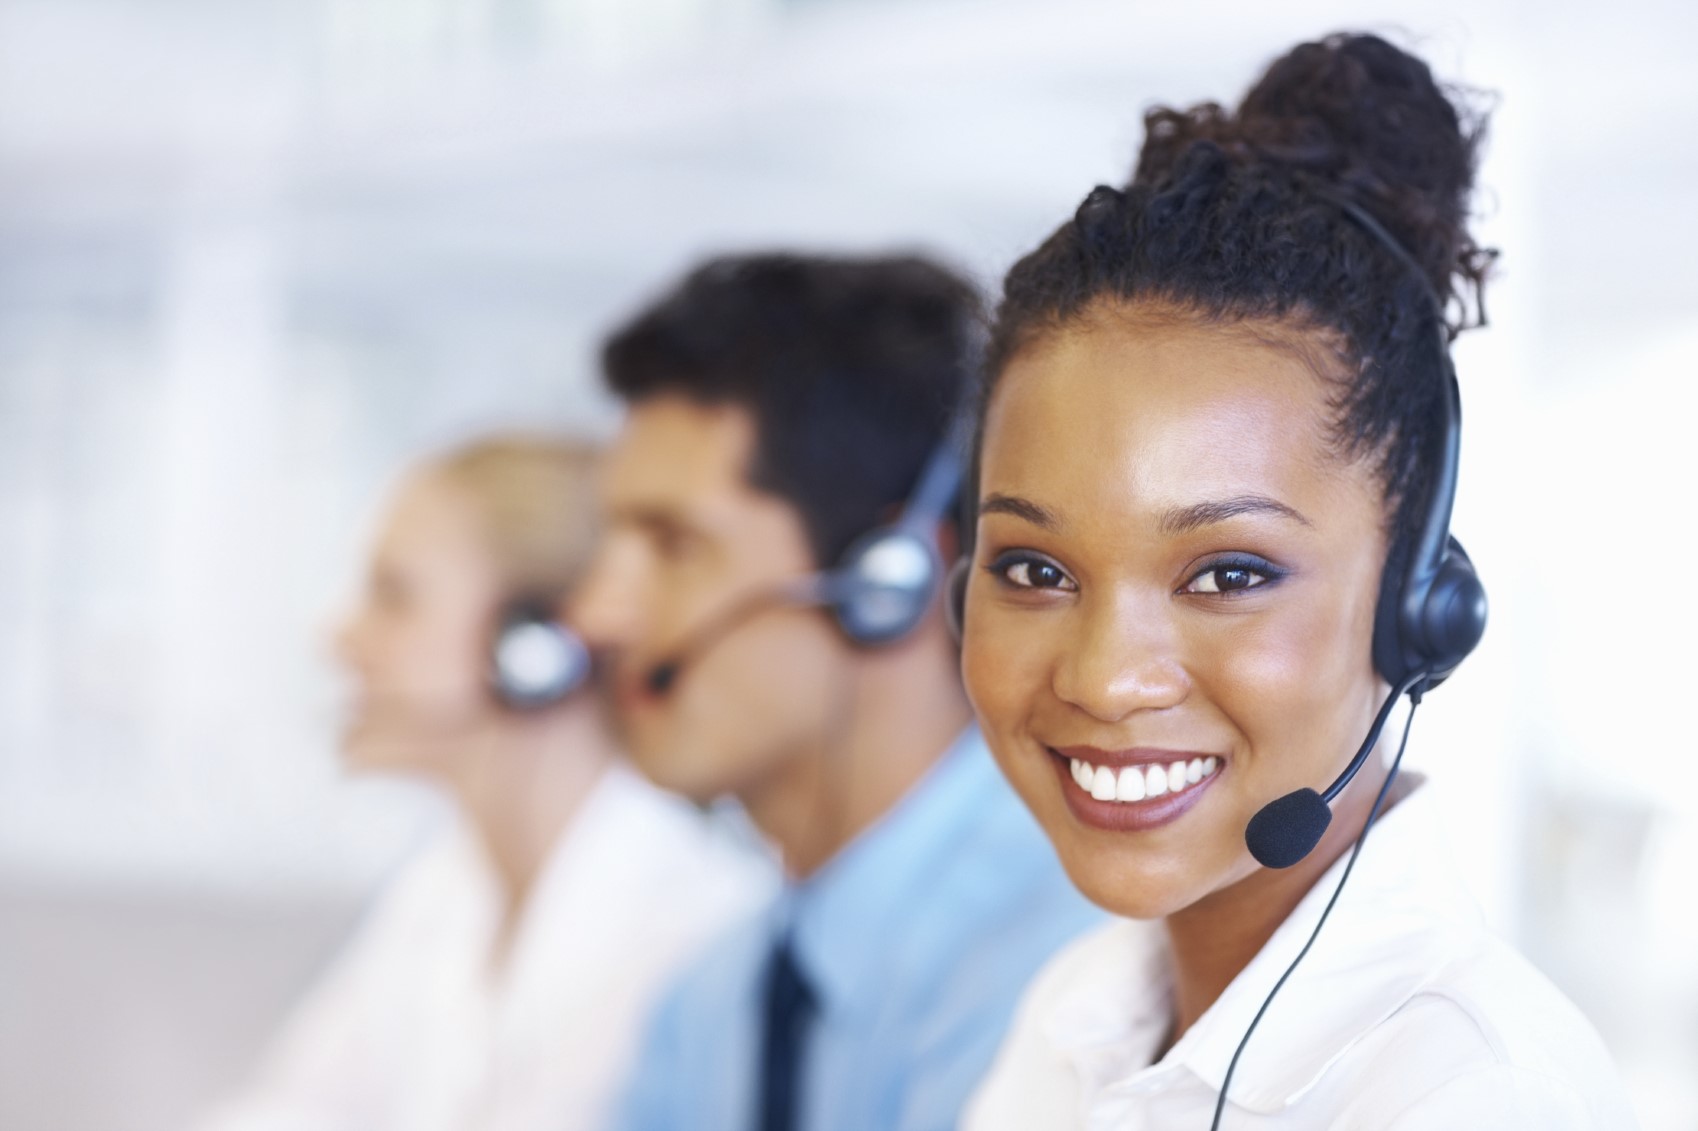 Top 5 Most Popular Posts on Customer Service featured image